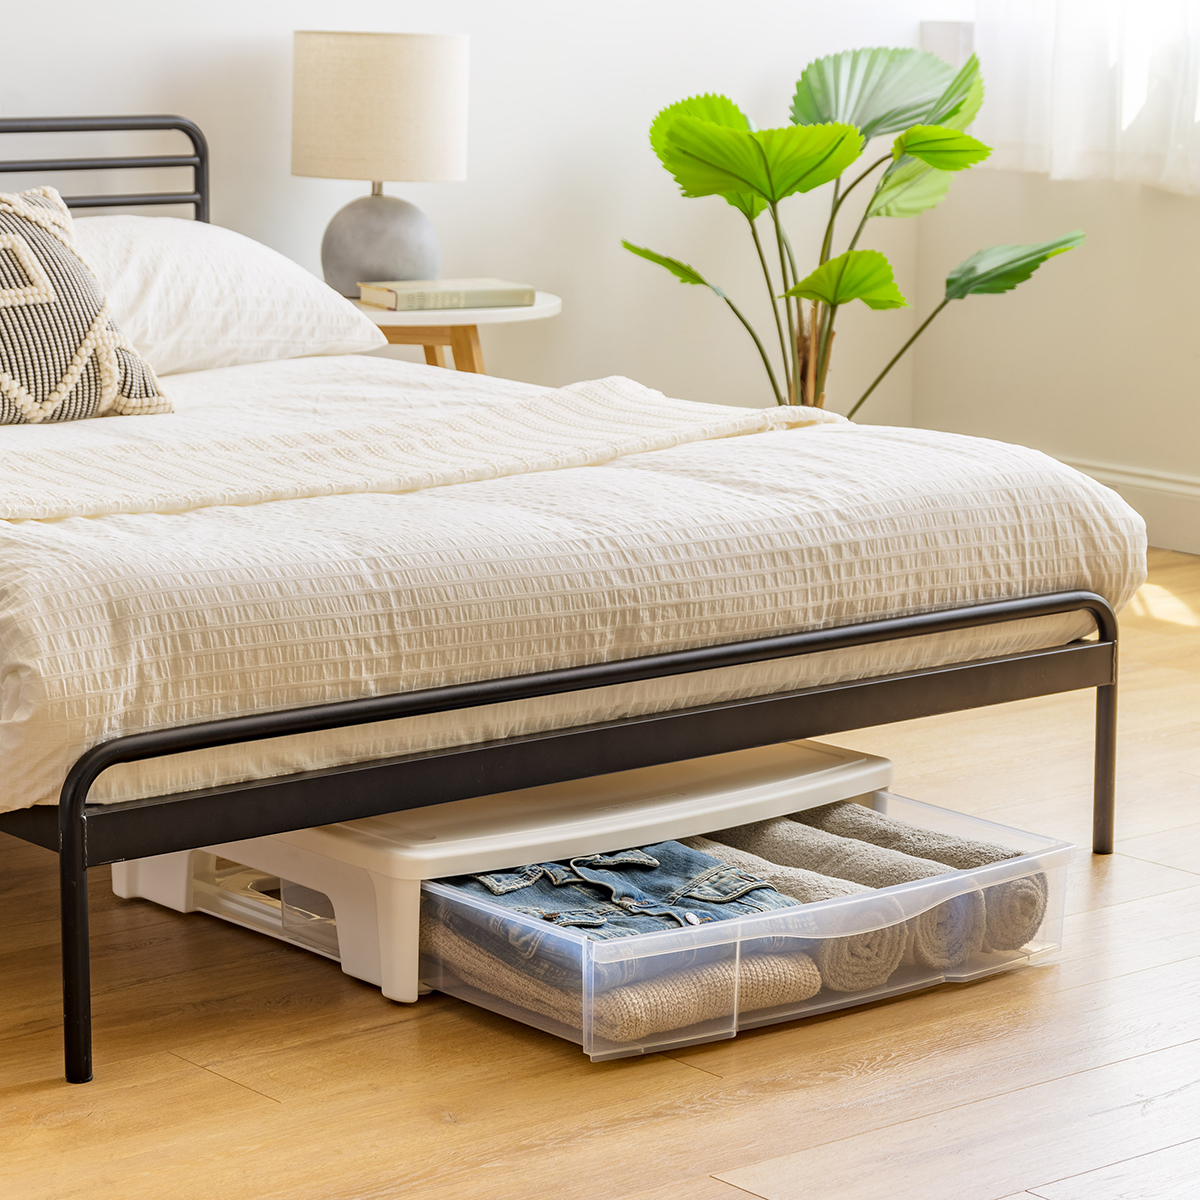 https://www.containerstore.com/catalogimages/483221/10092490-iris-wide-underbed-drawer-v.jpg